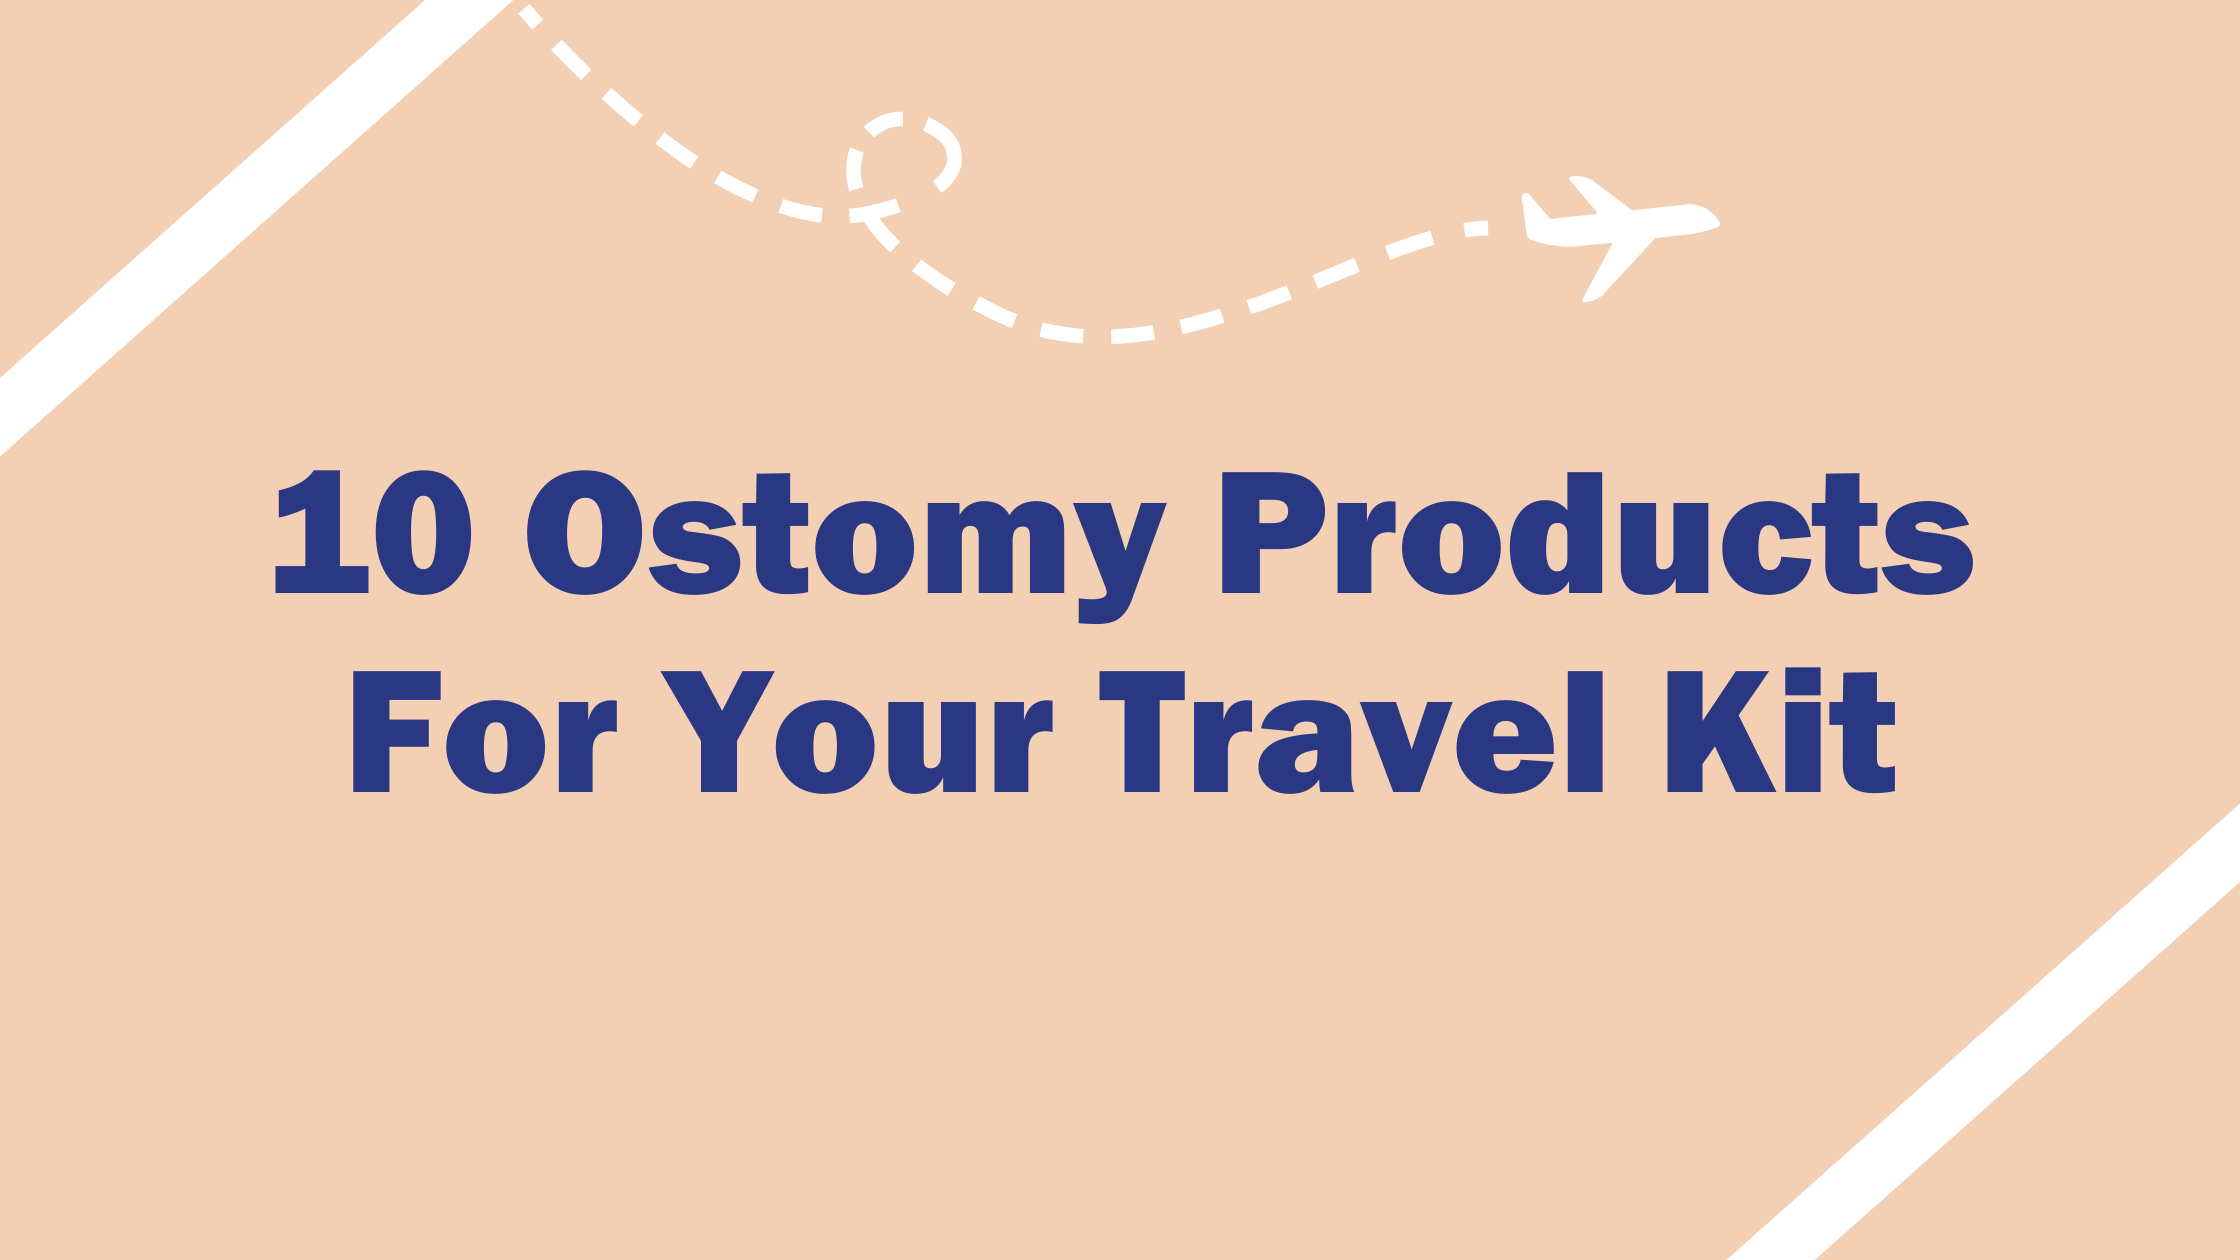 10 Ostomy Products For Your Travel Kit